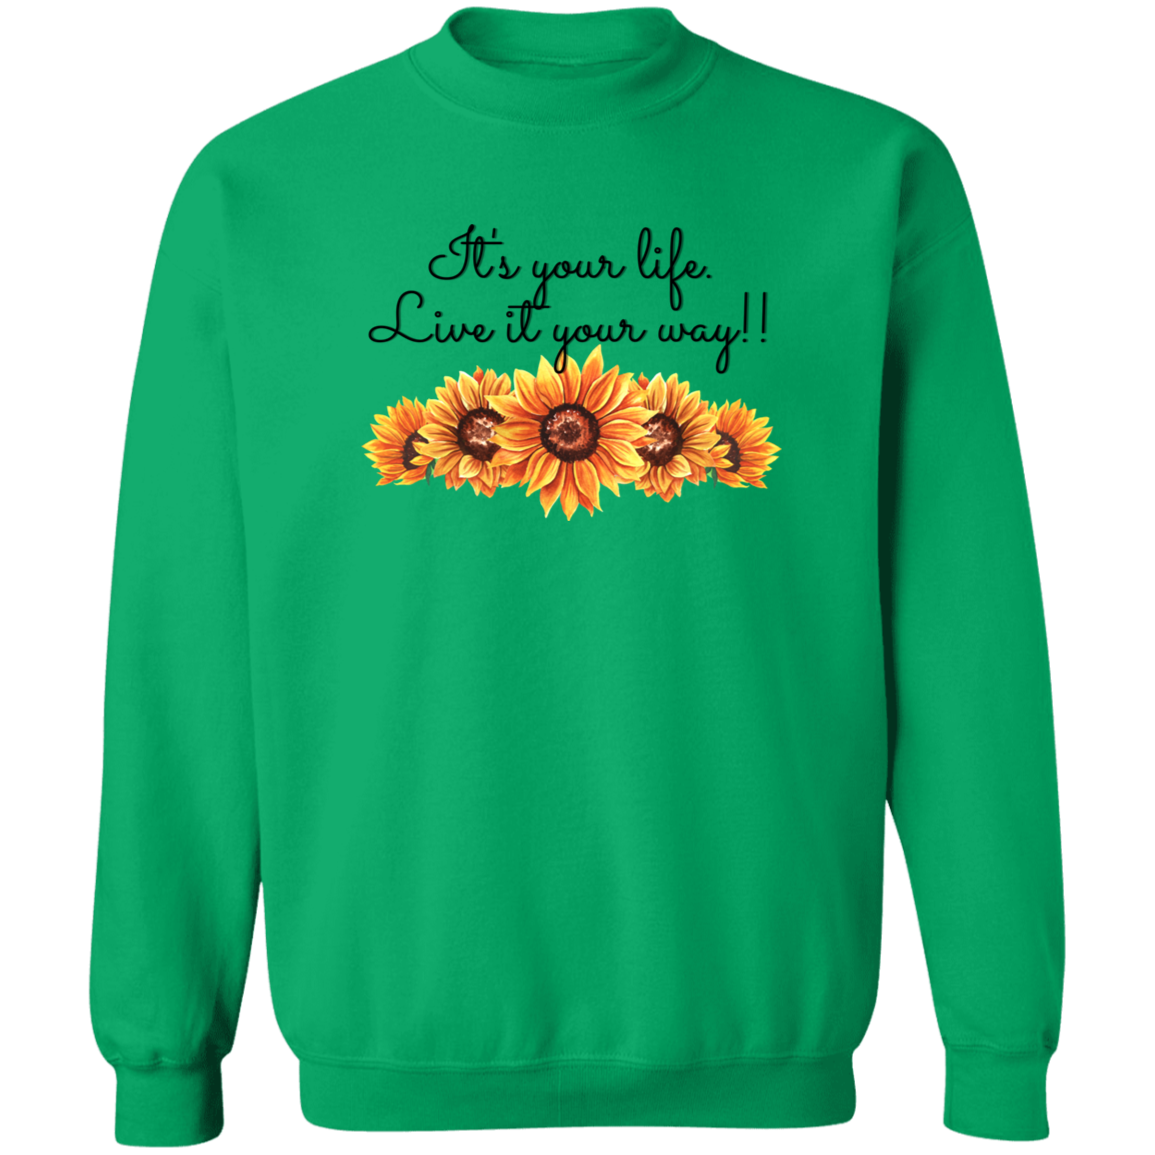 It's your Life. Live it your way (Sunflowers)